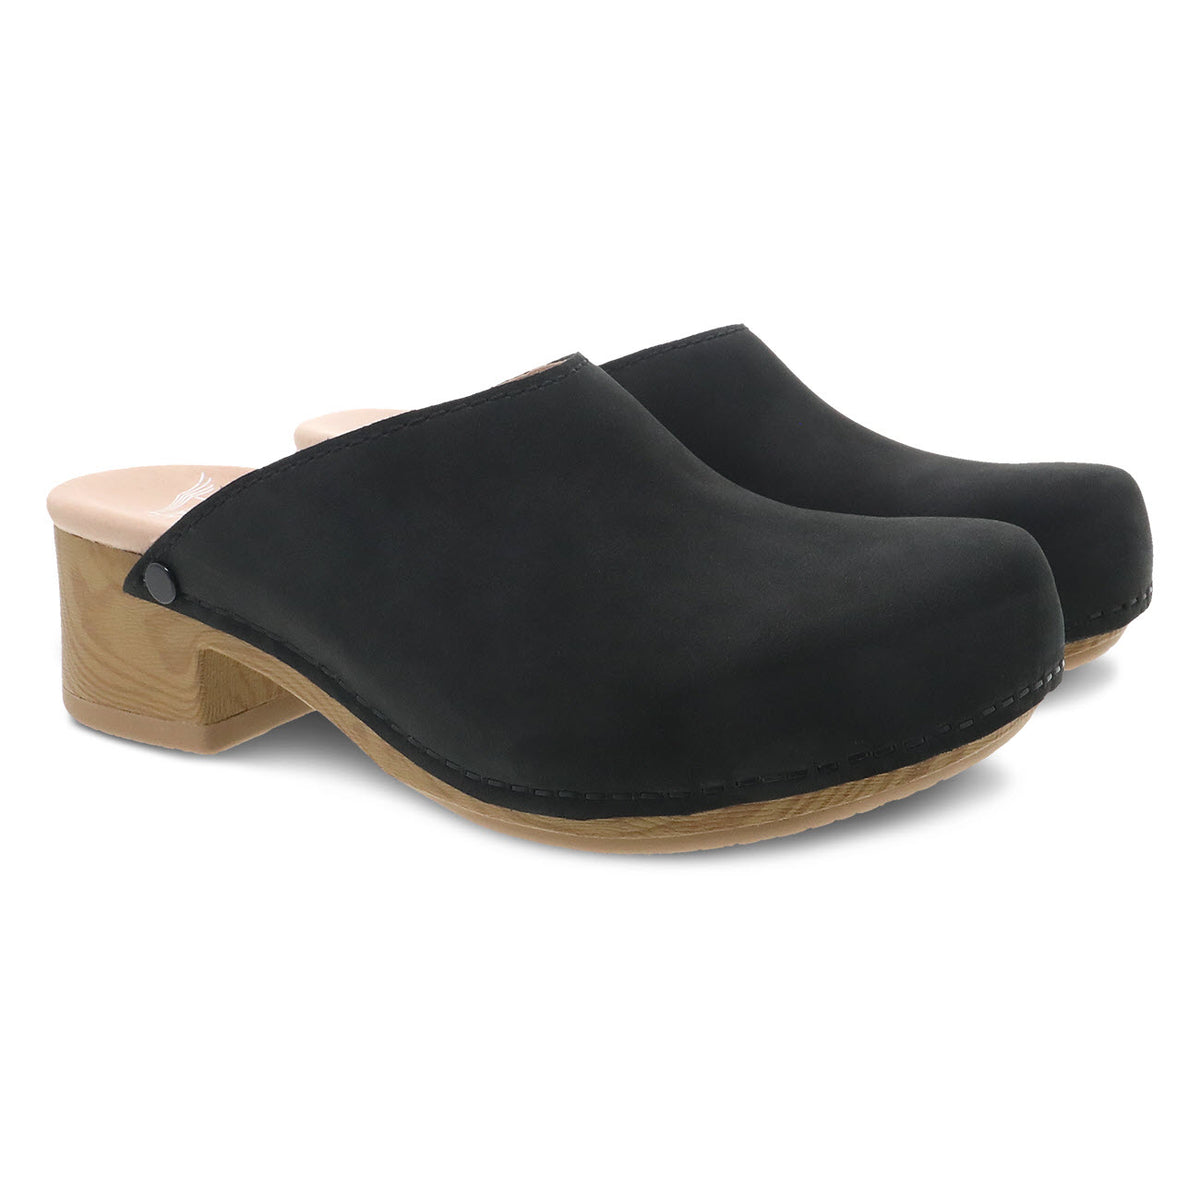 A pair of black Dansko Giulia clogs with wooden soles and a lightweight polypropylene midsole on a white background.